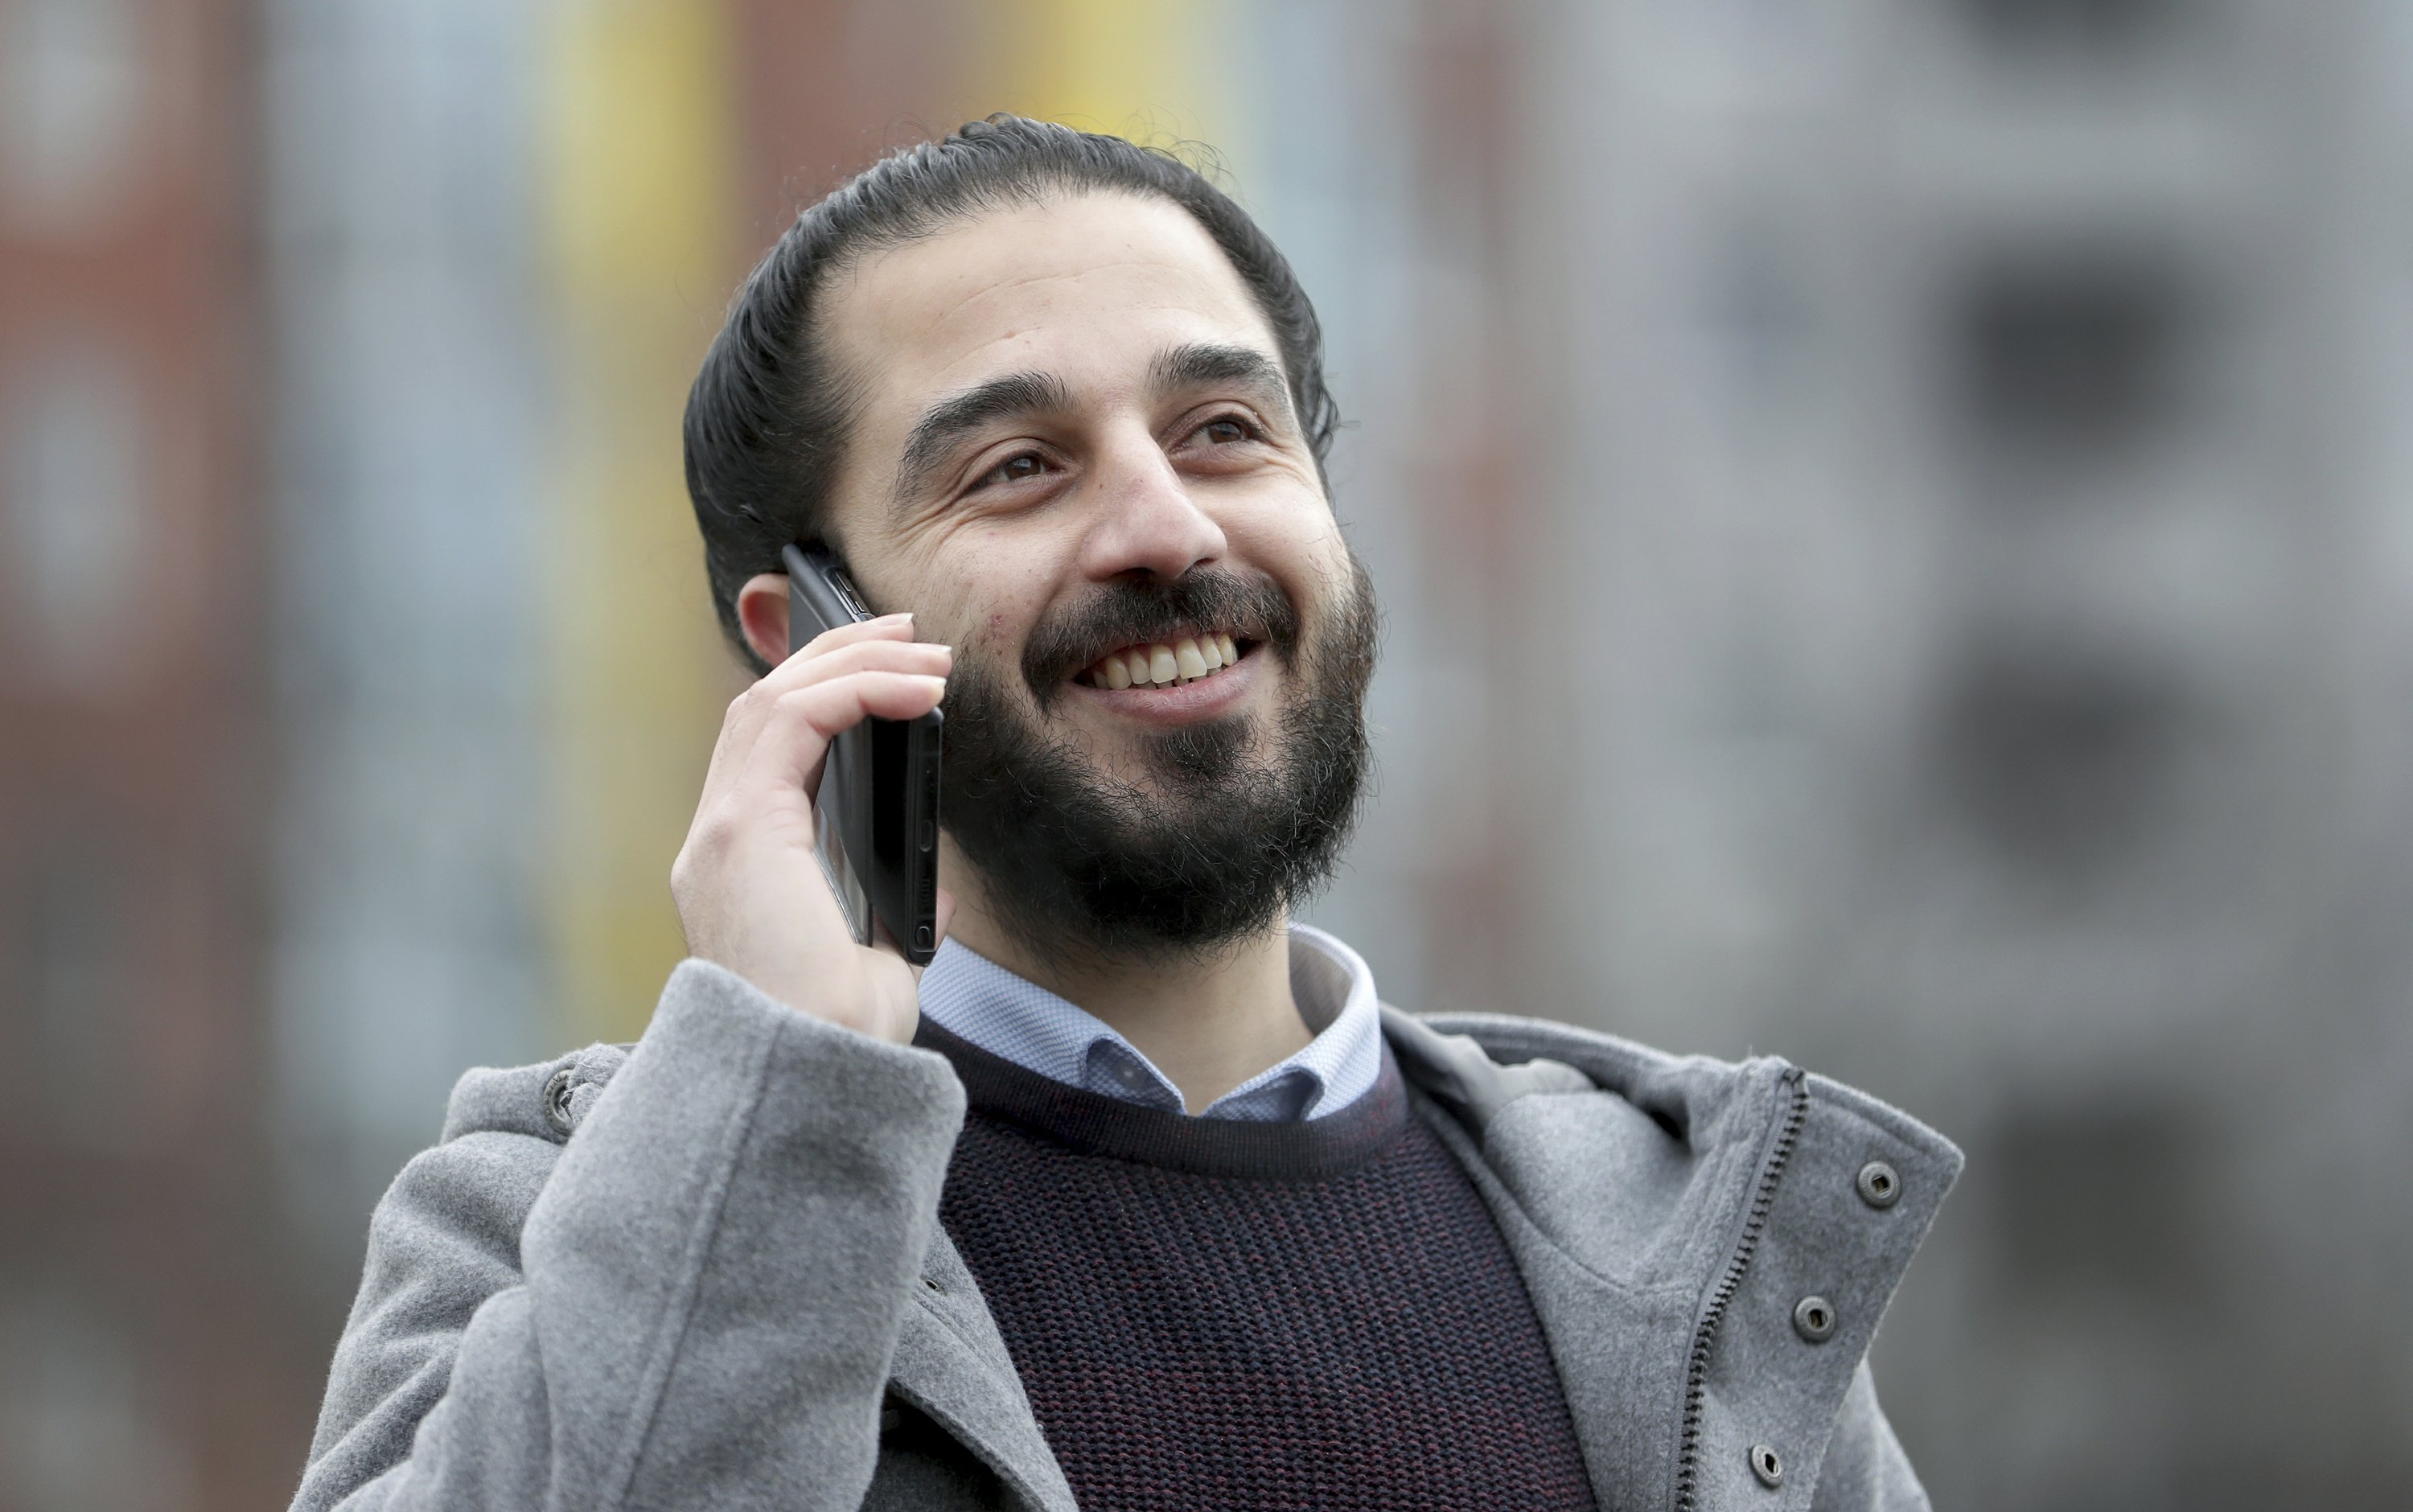 Syrian who fled to Germany 5 years ago runs for parliament